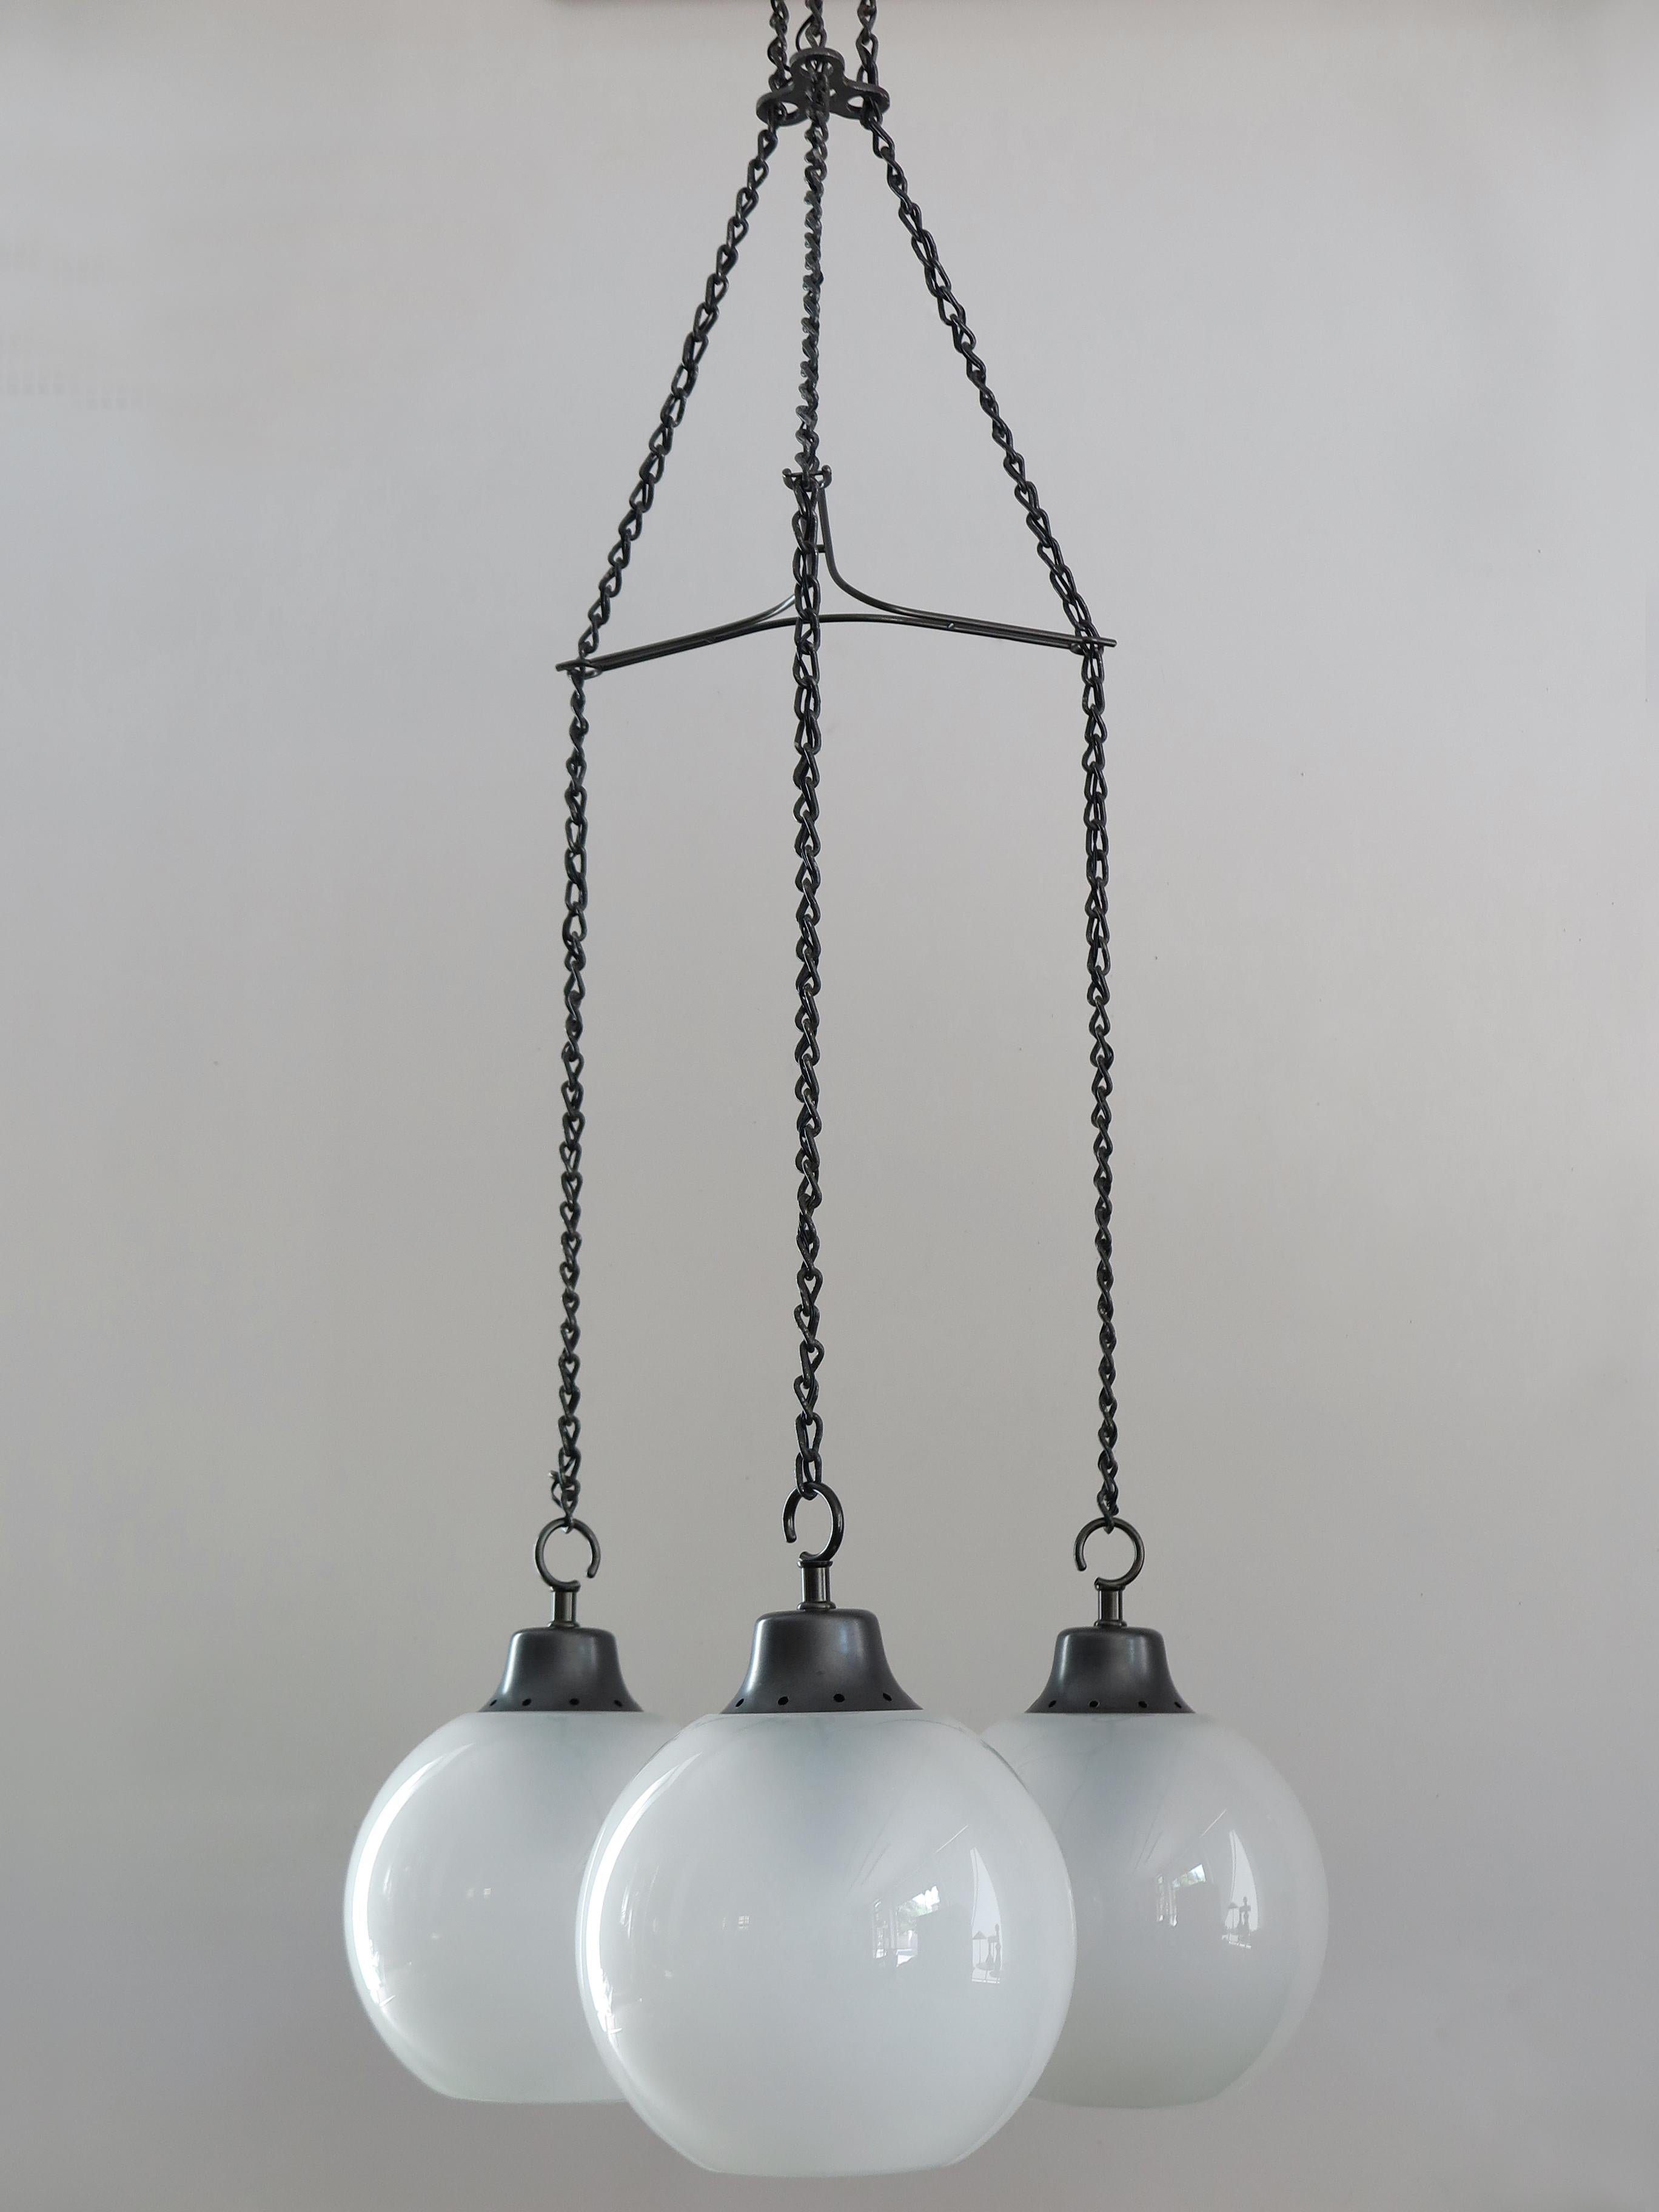 Italian Mid-Century Modern design pendant lamp model “Grappolo” LS10 designed by Italian artist Luigi Caccia Dominioni and produced by Azucena from 1967, blown glass spheres, trefoil spacer in burnished brass and painted metal chains, the chains can